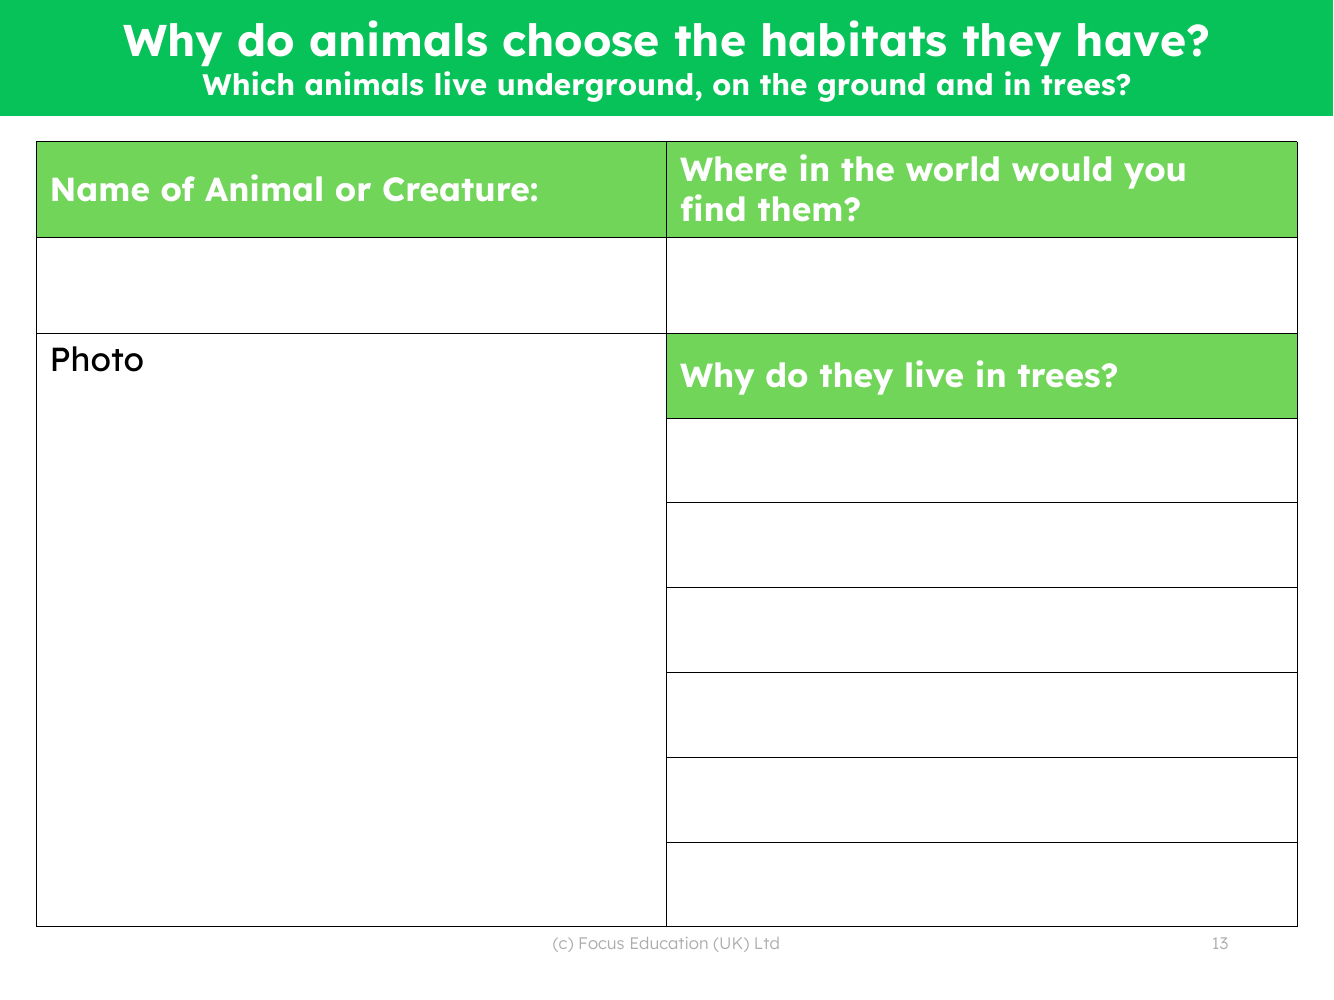 Choose your own animal - Fact file